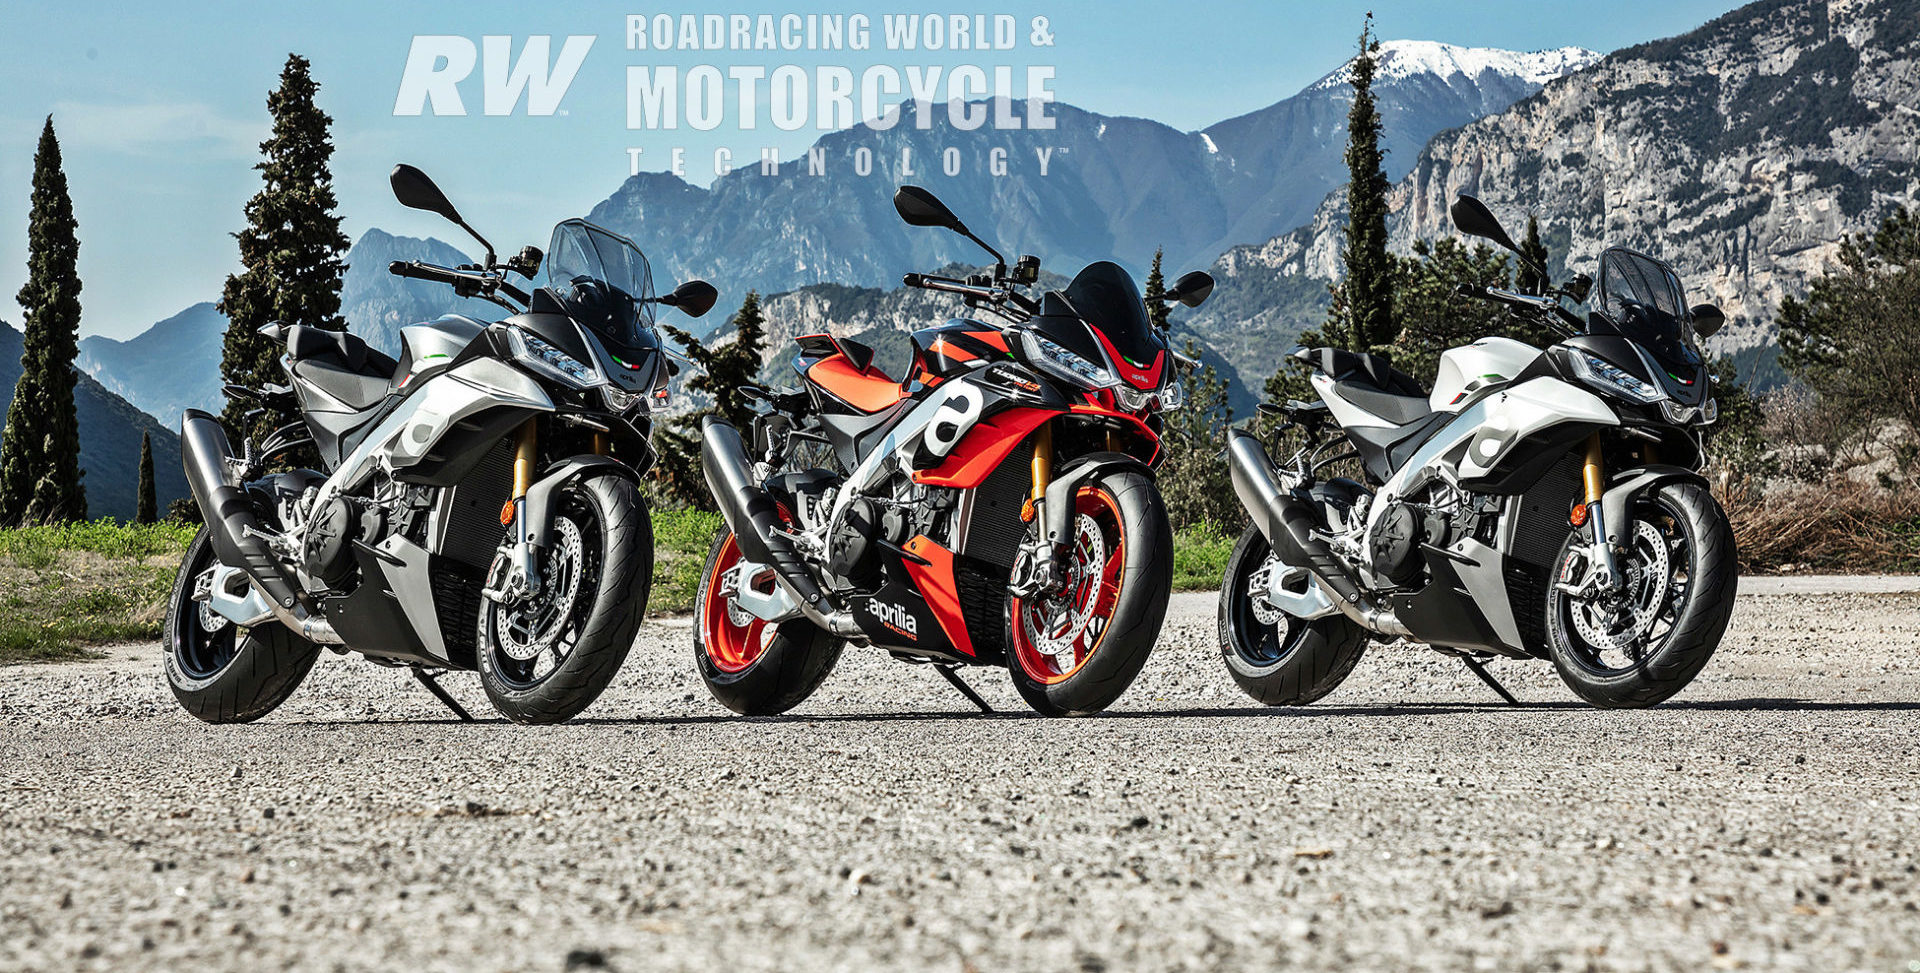 The 2021 Aprilia Tuono V4 Factory comes with sticky, track-oriented Pirelli Supercorsa tires, including a larger, 200-series rear; Öhlins Smart EC 2.0 semi-active electronically adjustable suspension; lower handlebars; a trick new swingarm; and shorter gearing. Photos courtesy Aprilia.